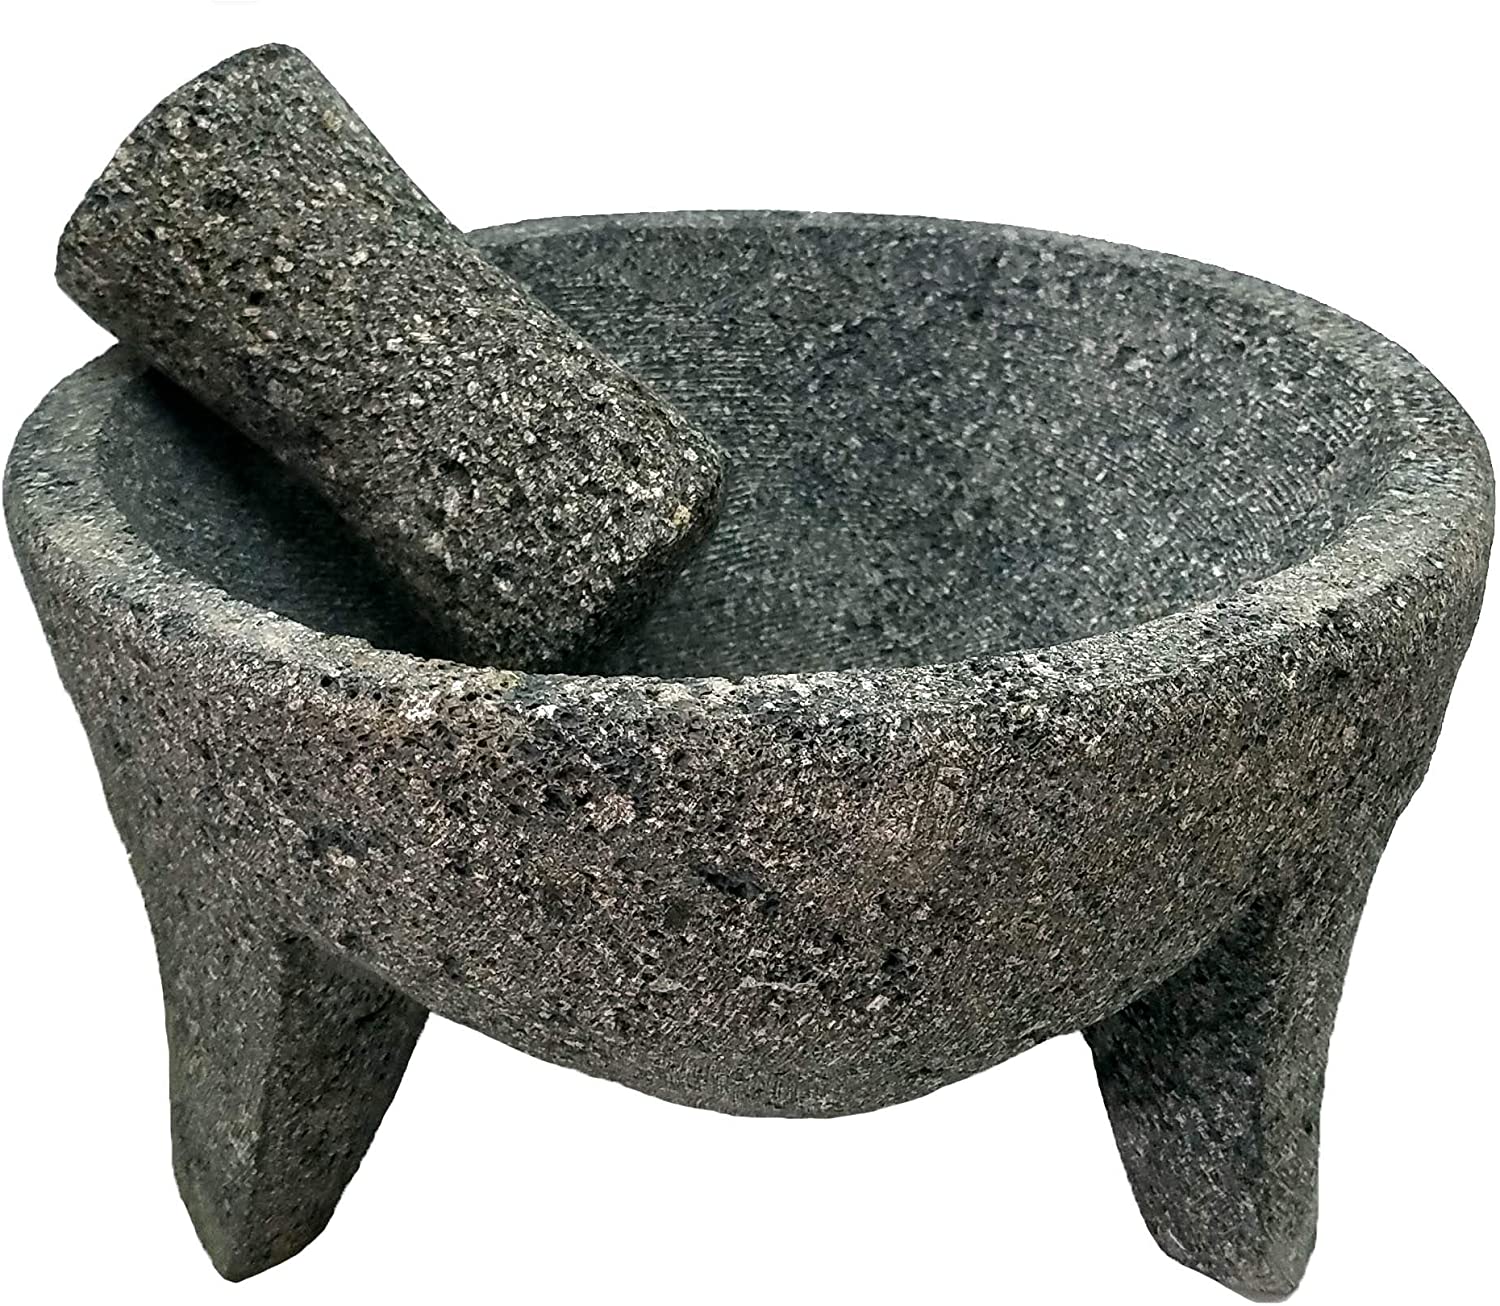 VOLCANIC ROCK PRODUCTS / Classic 8'' Molcajete Mortar and Pestle Set / Prepare authentic dishes with this beautiful handcrafted molcajete mortar and pestle set.